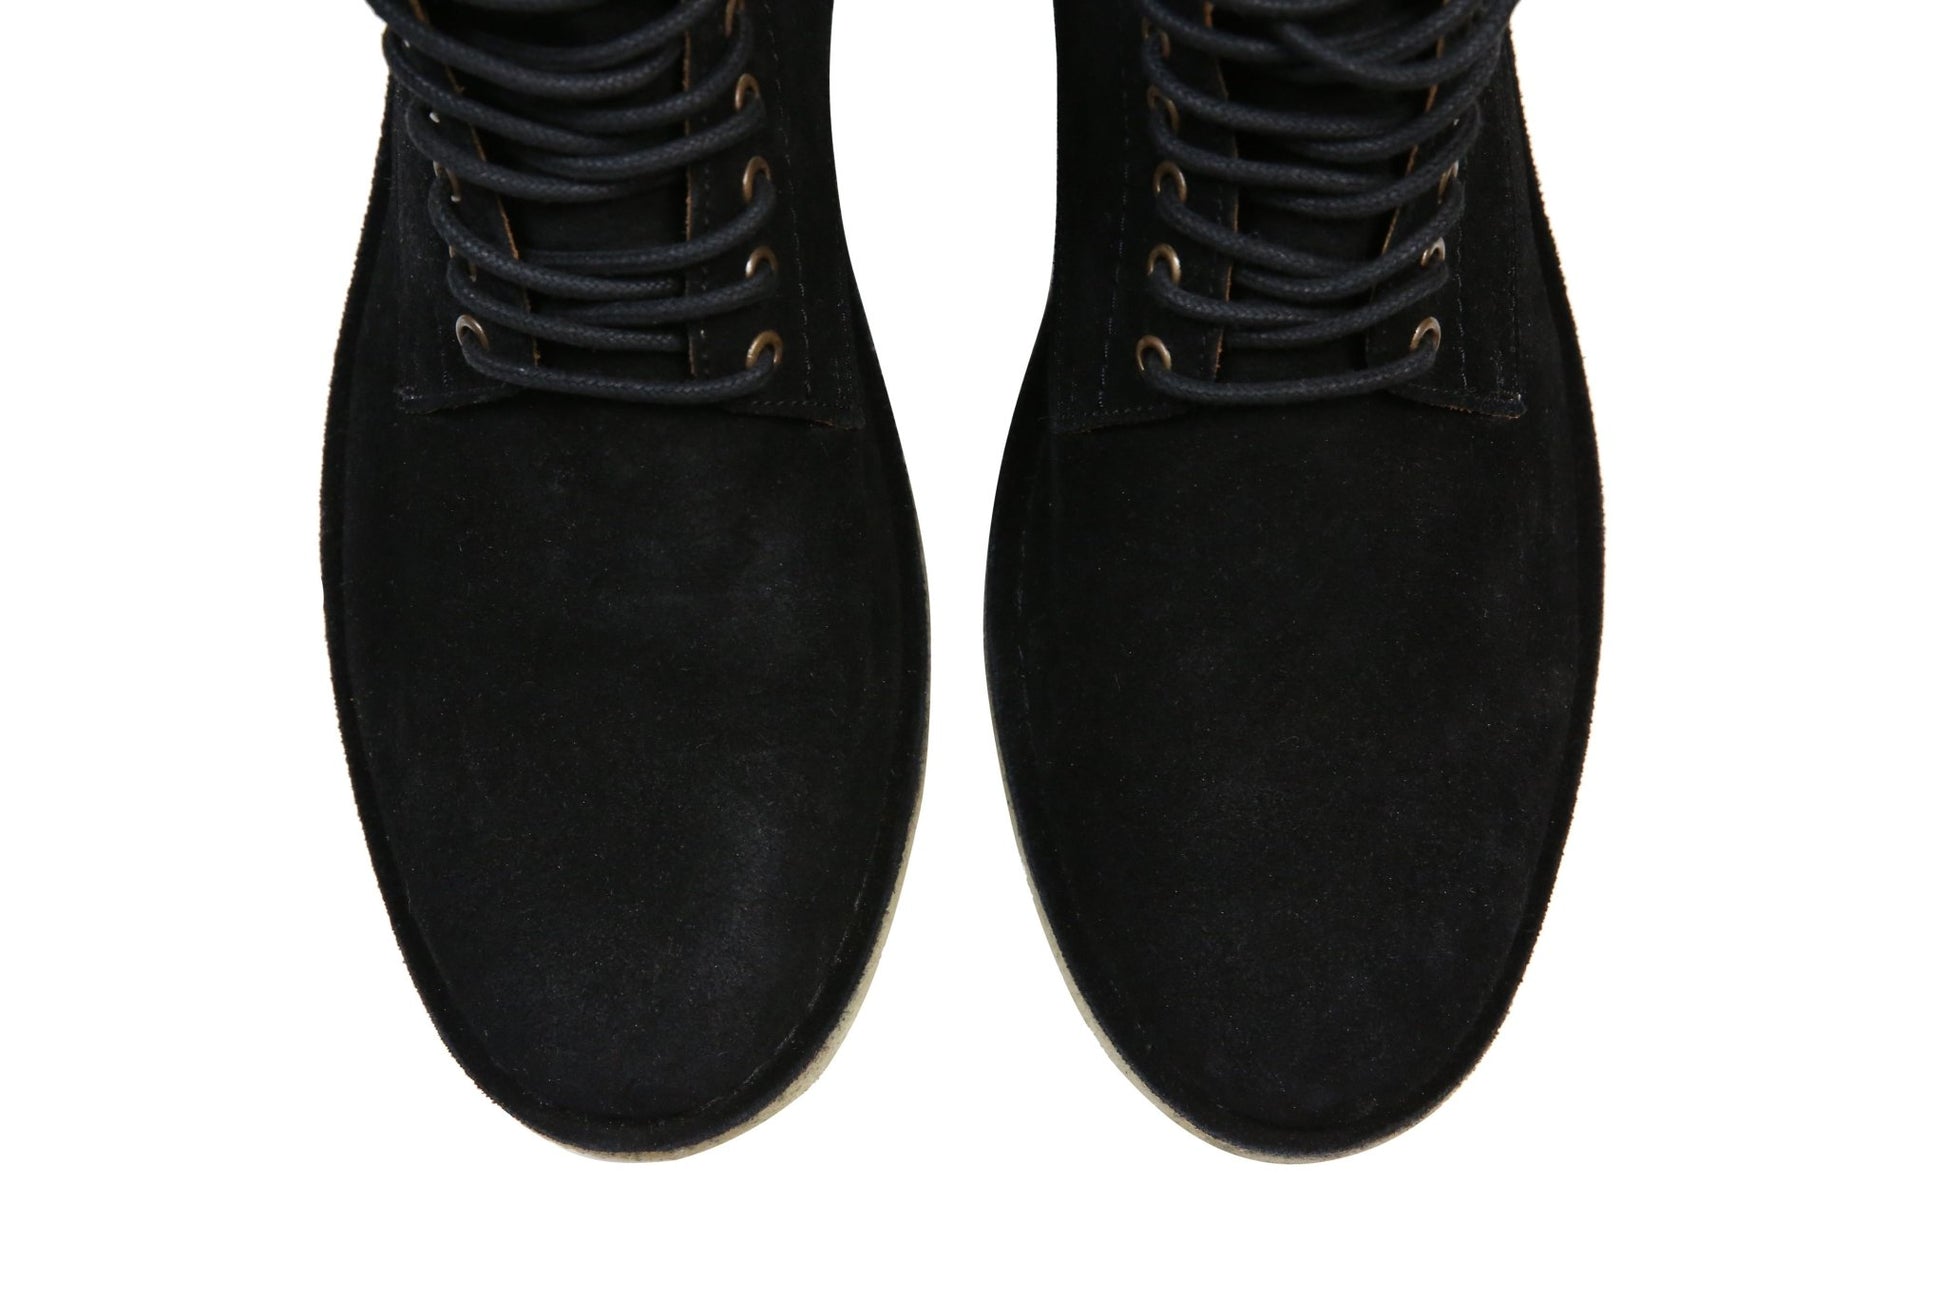 Hound & Hammer The Hunter | Black Ankle Boots for Men - Men - Footwear - Boots - Ankle Boots - Benn~Burry